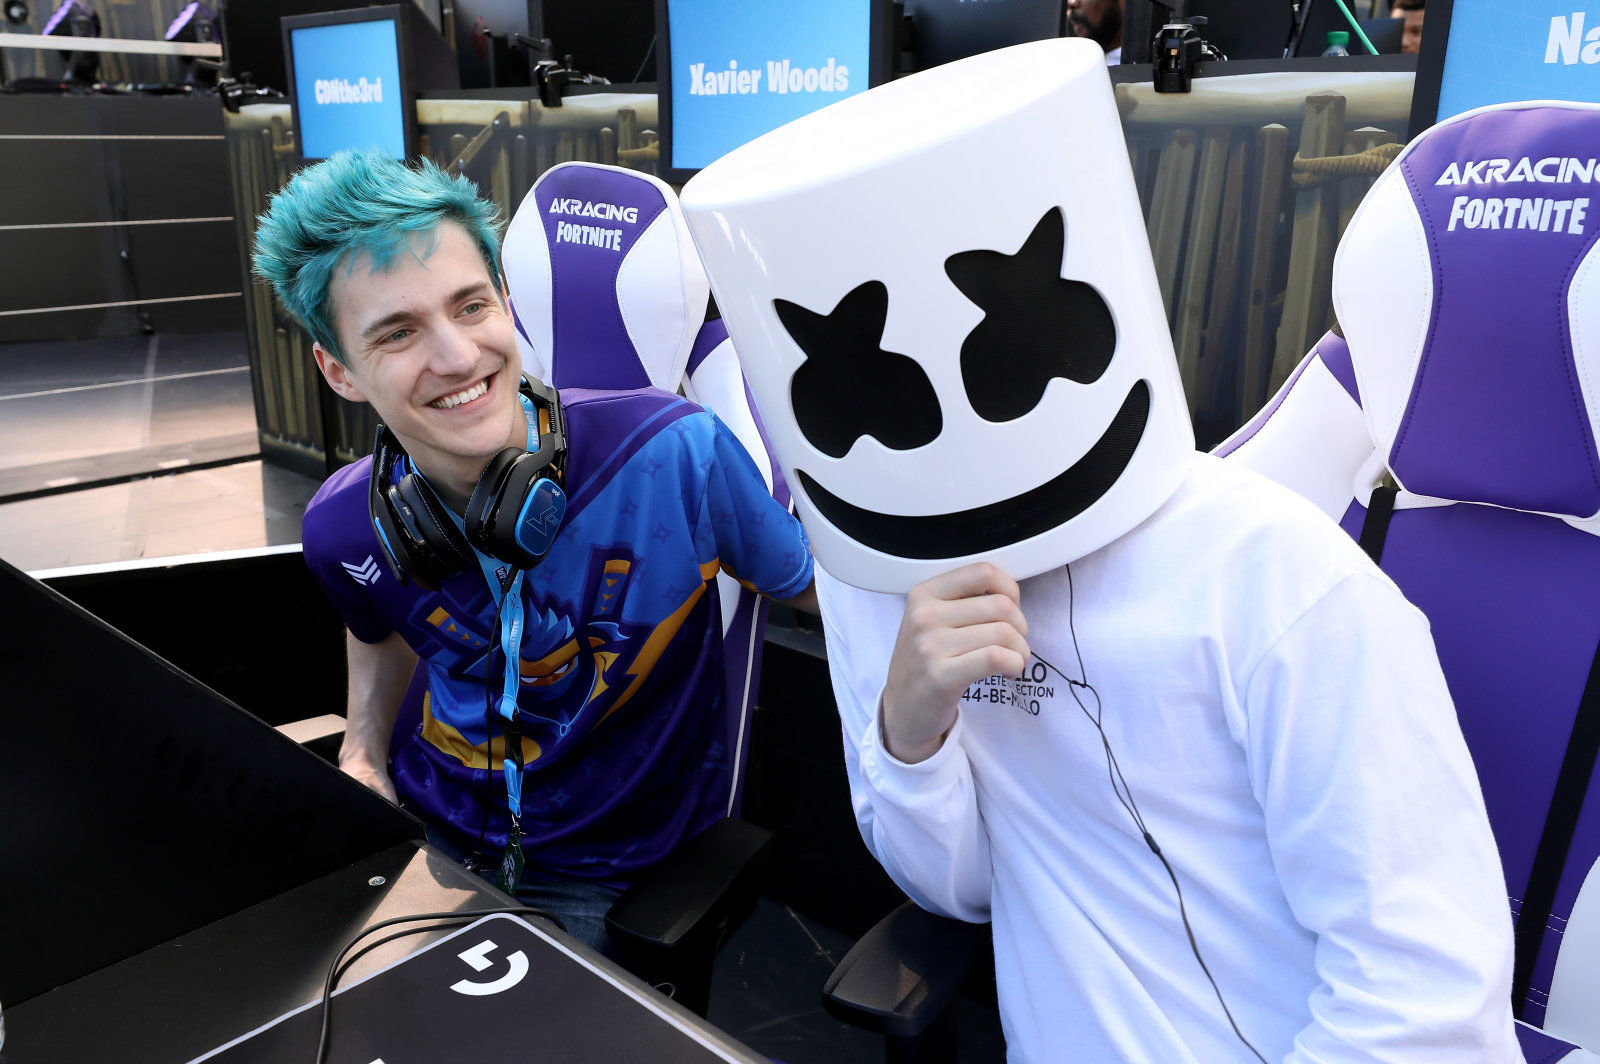 Fortnite Will Host A Marshmello Concert This Weekend